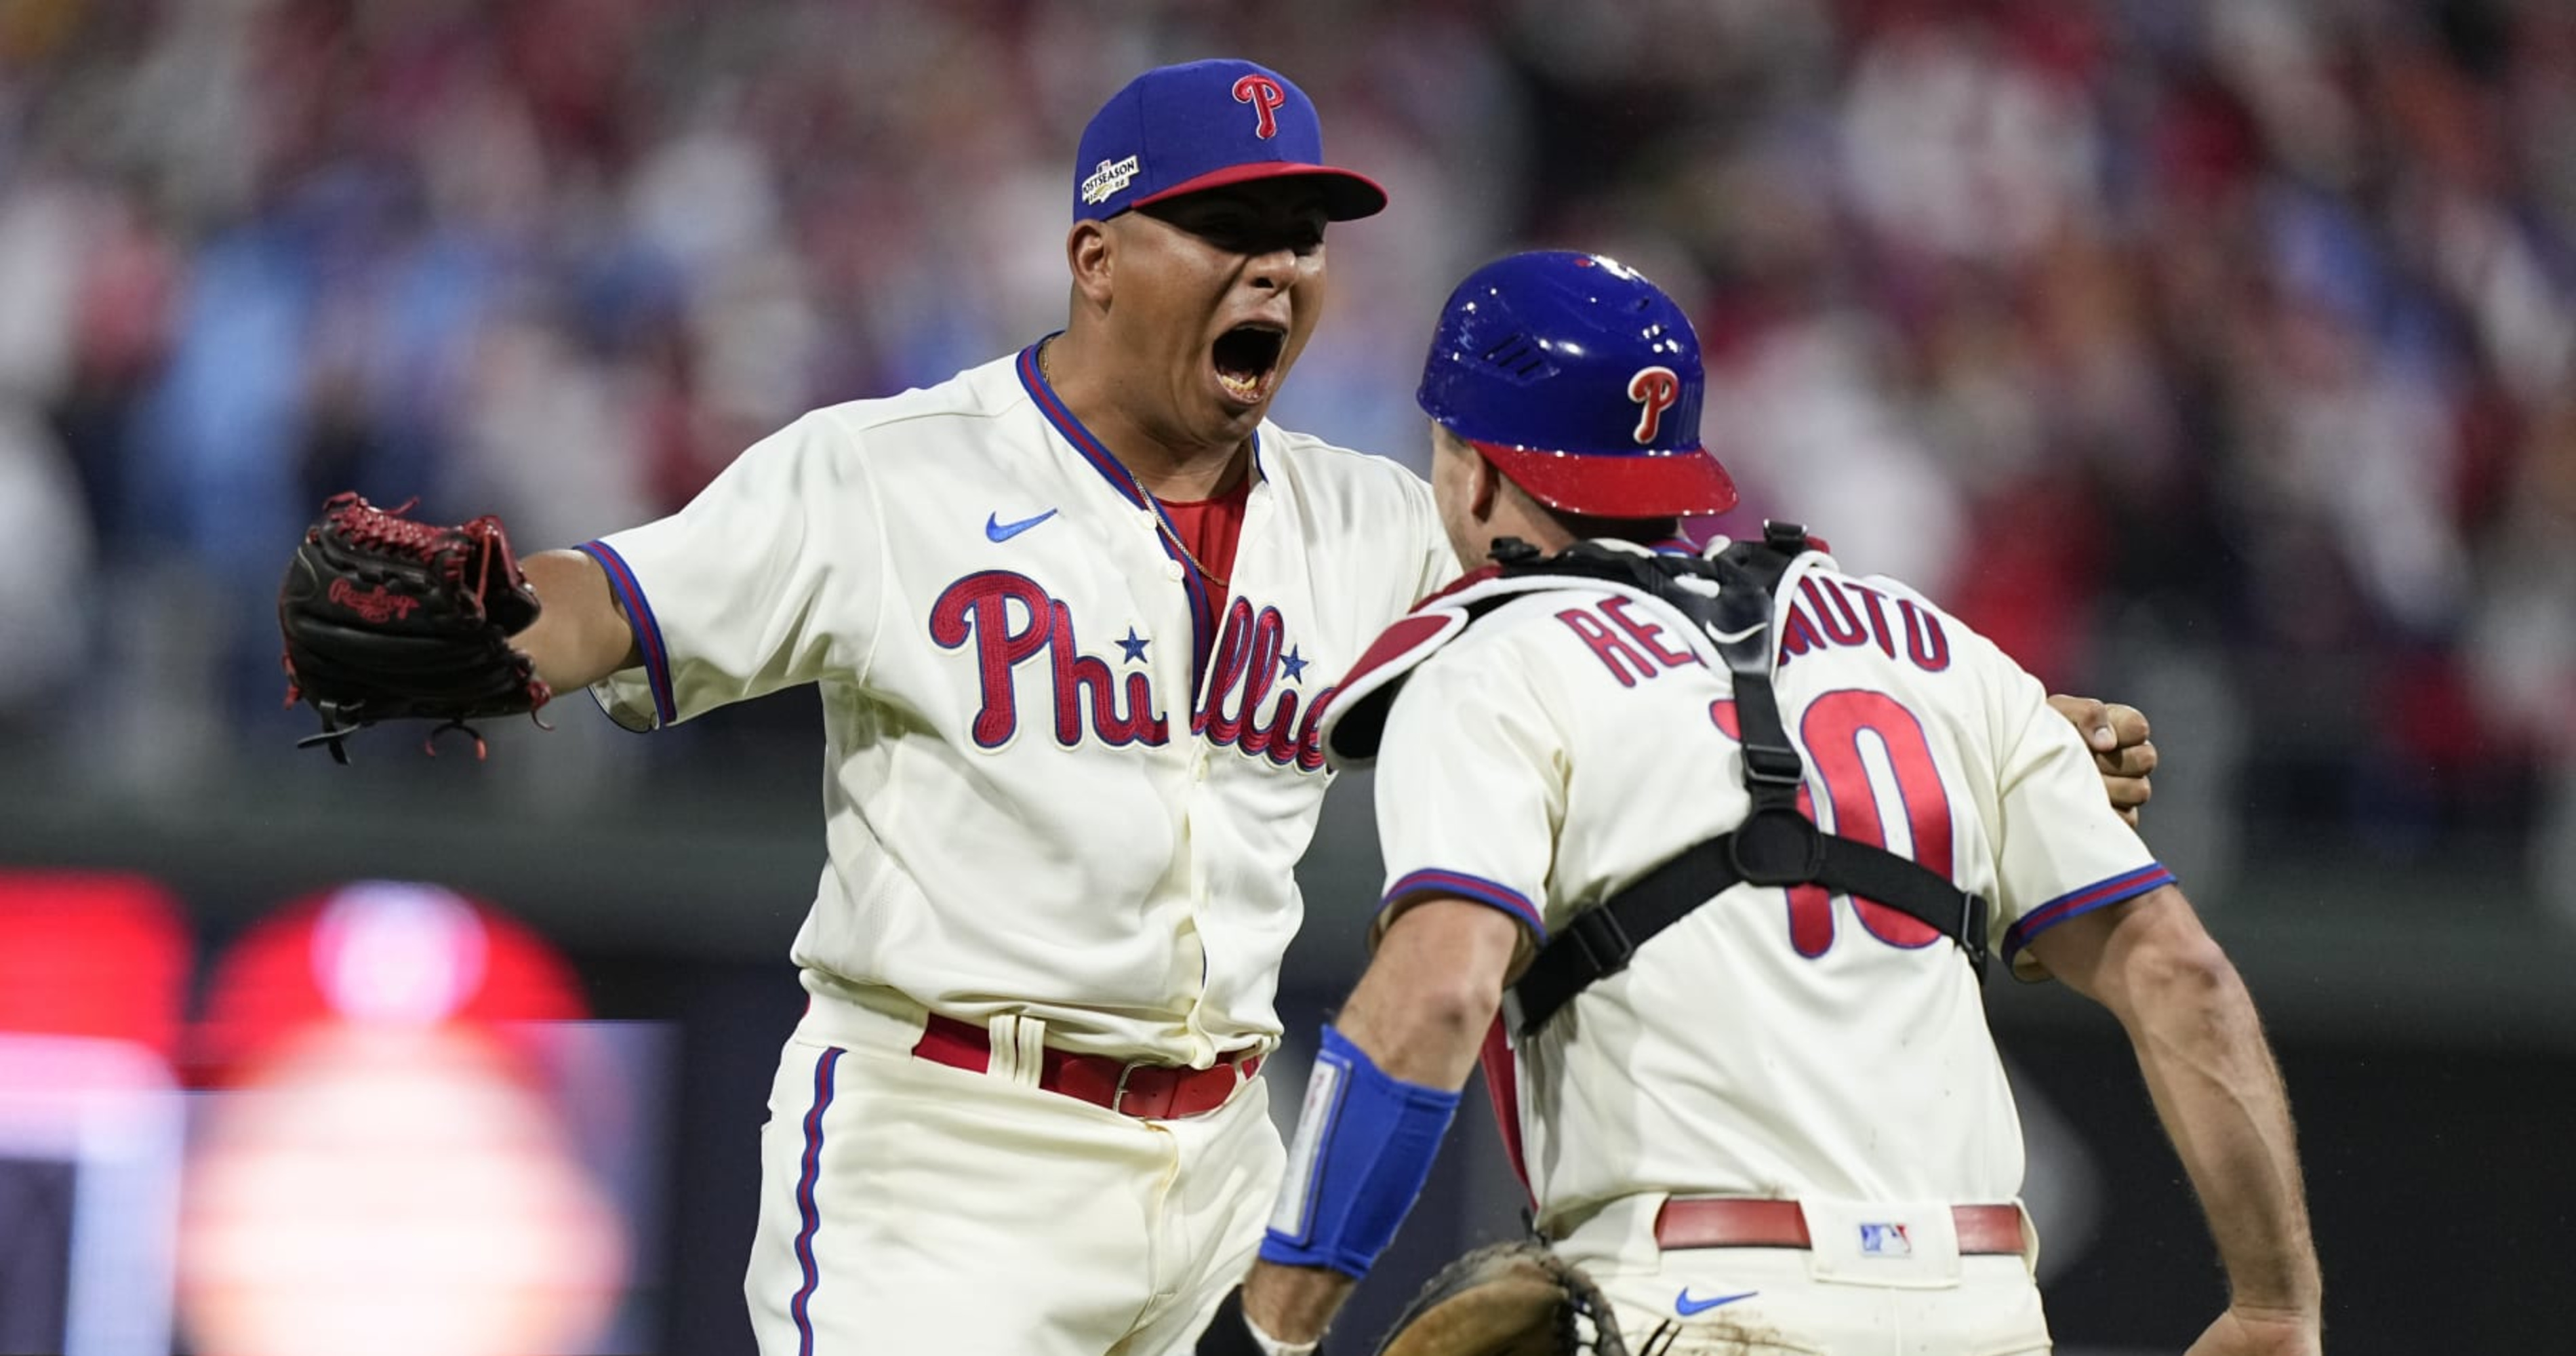 Phillies' Citizens Bank Park World Series Tickets Selling for